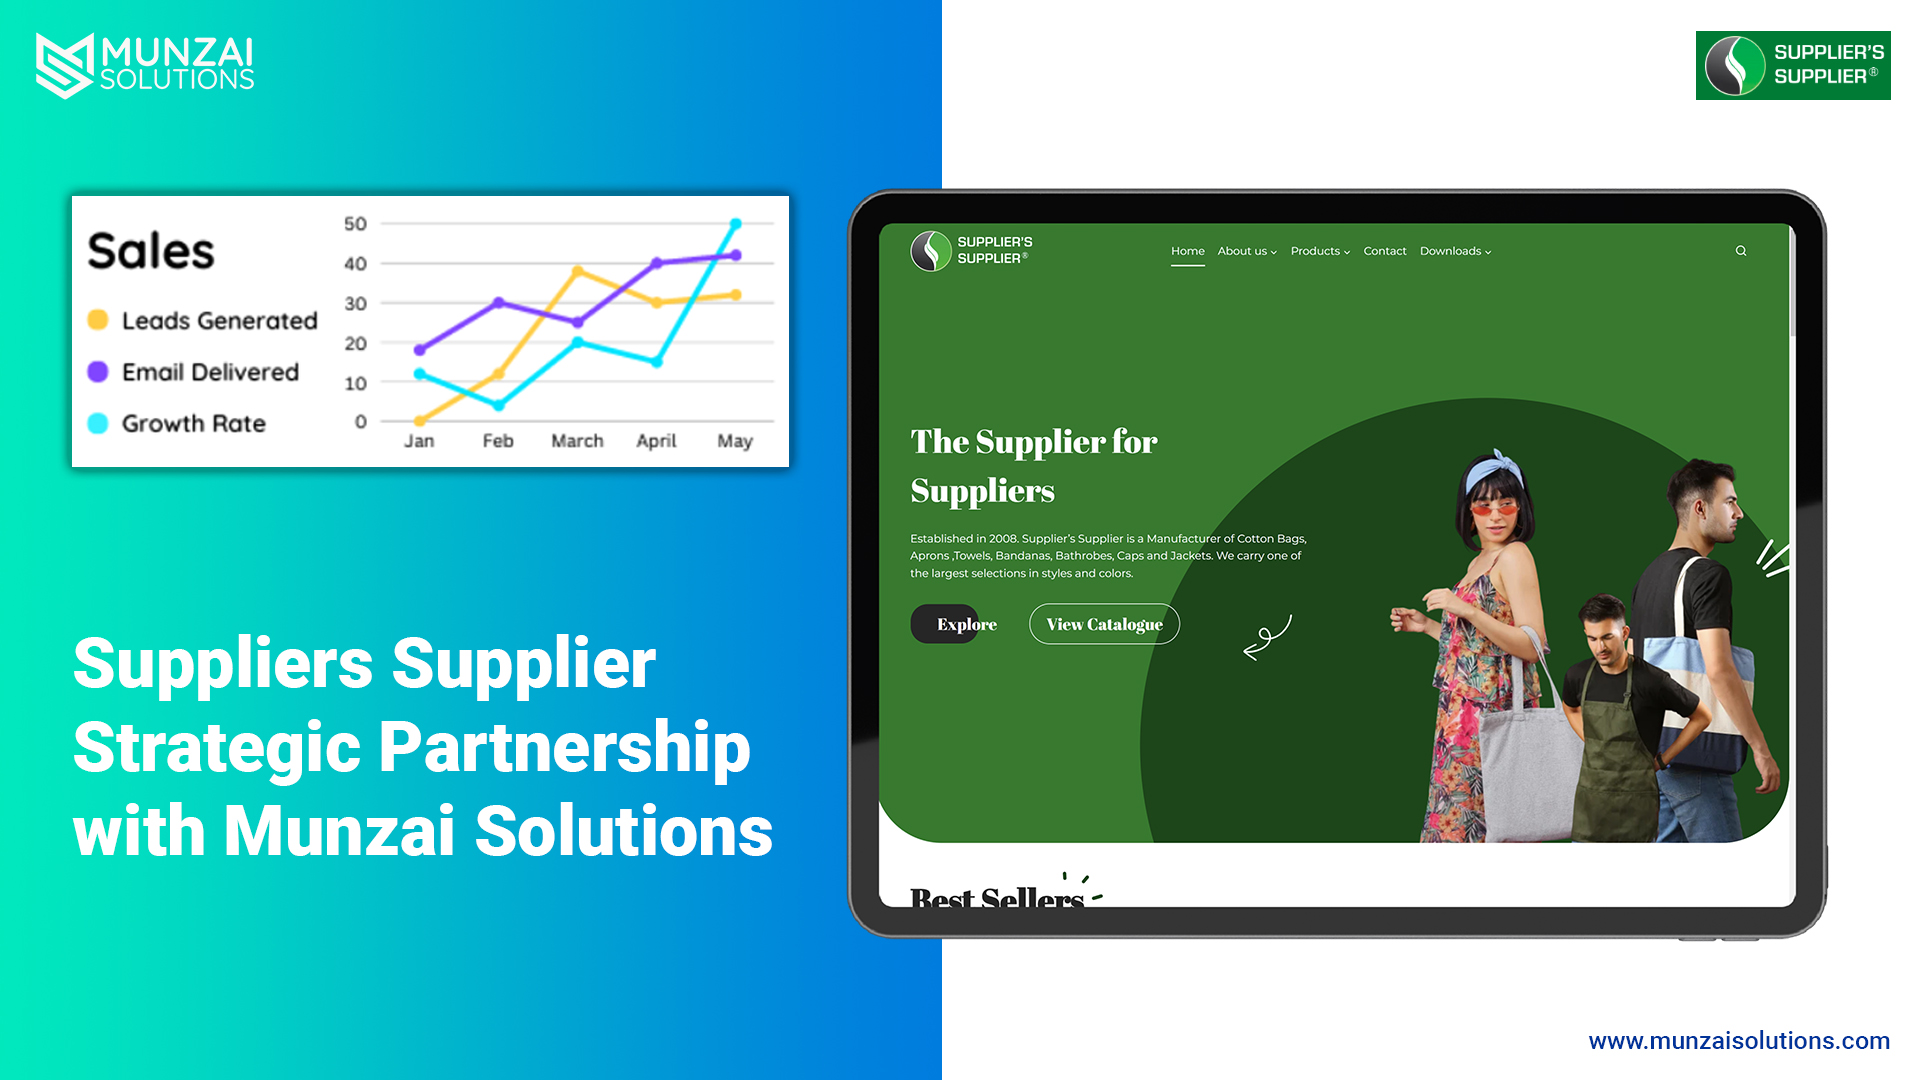 Suppliers Supplier and Munzai Solutions Strategic Partnership